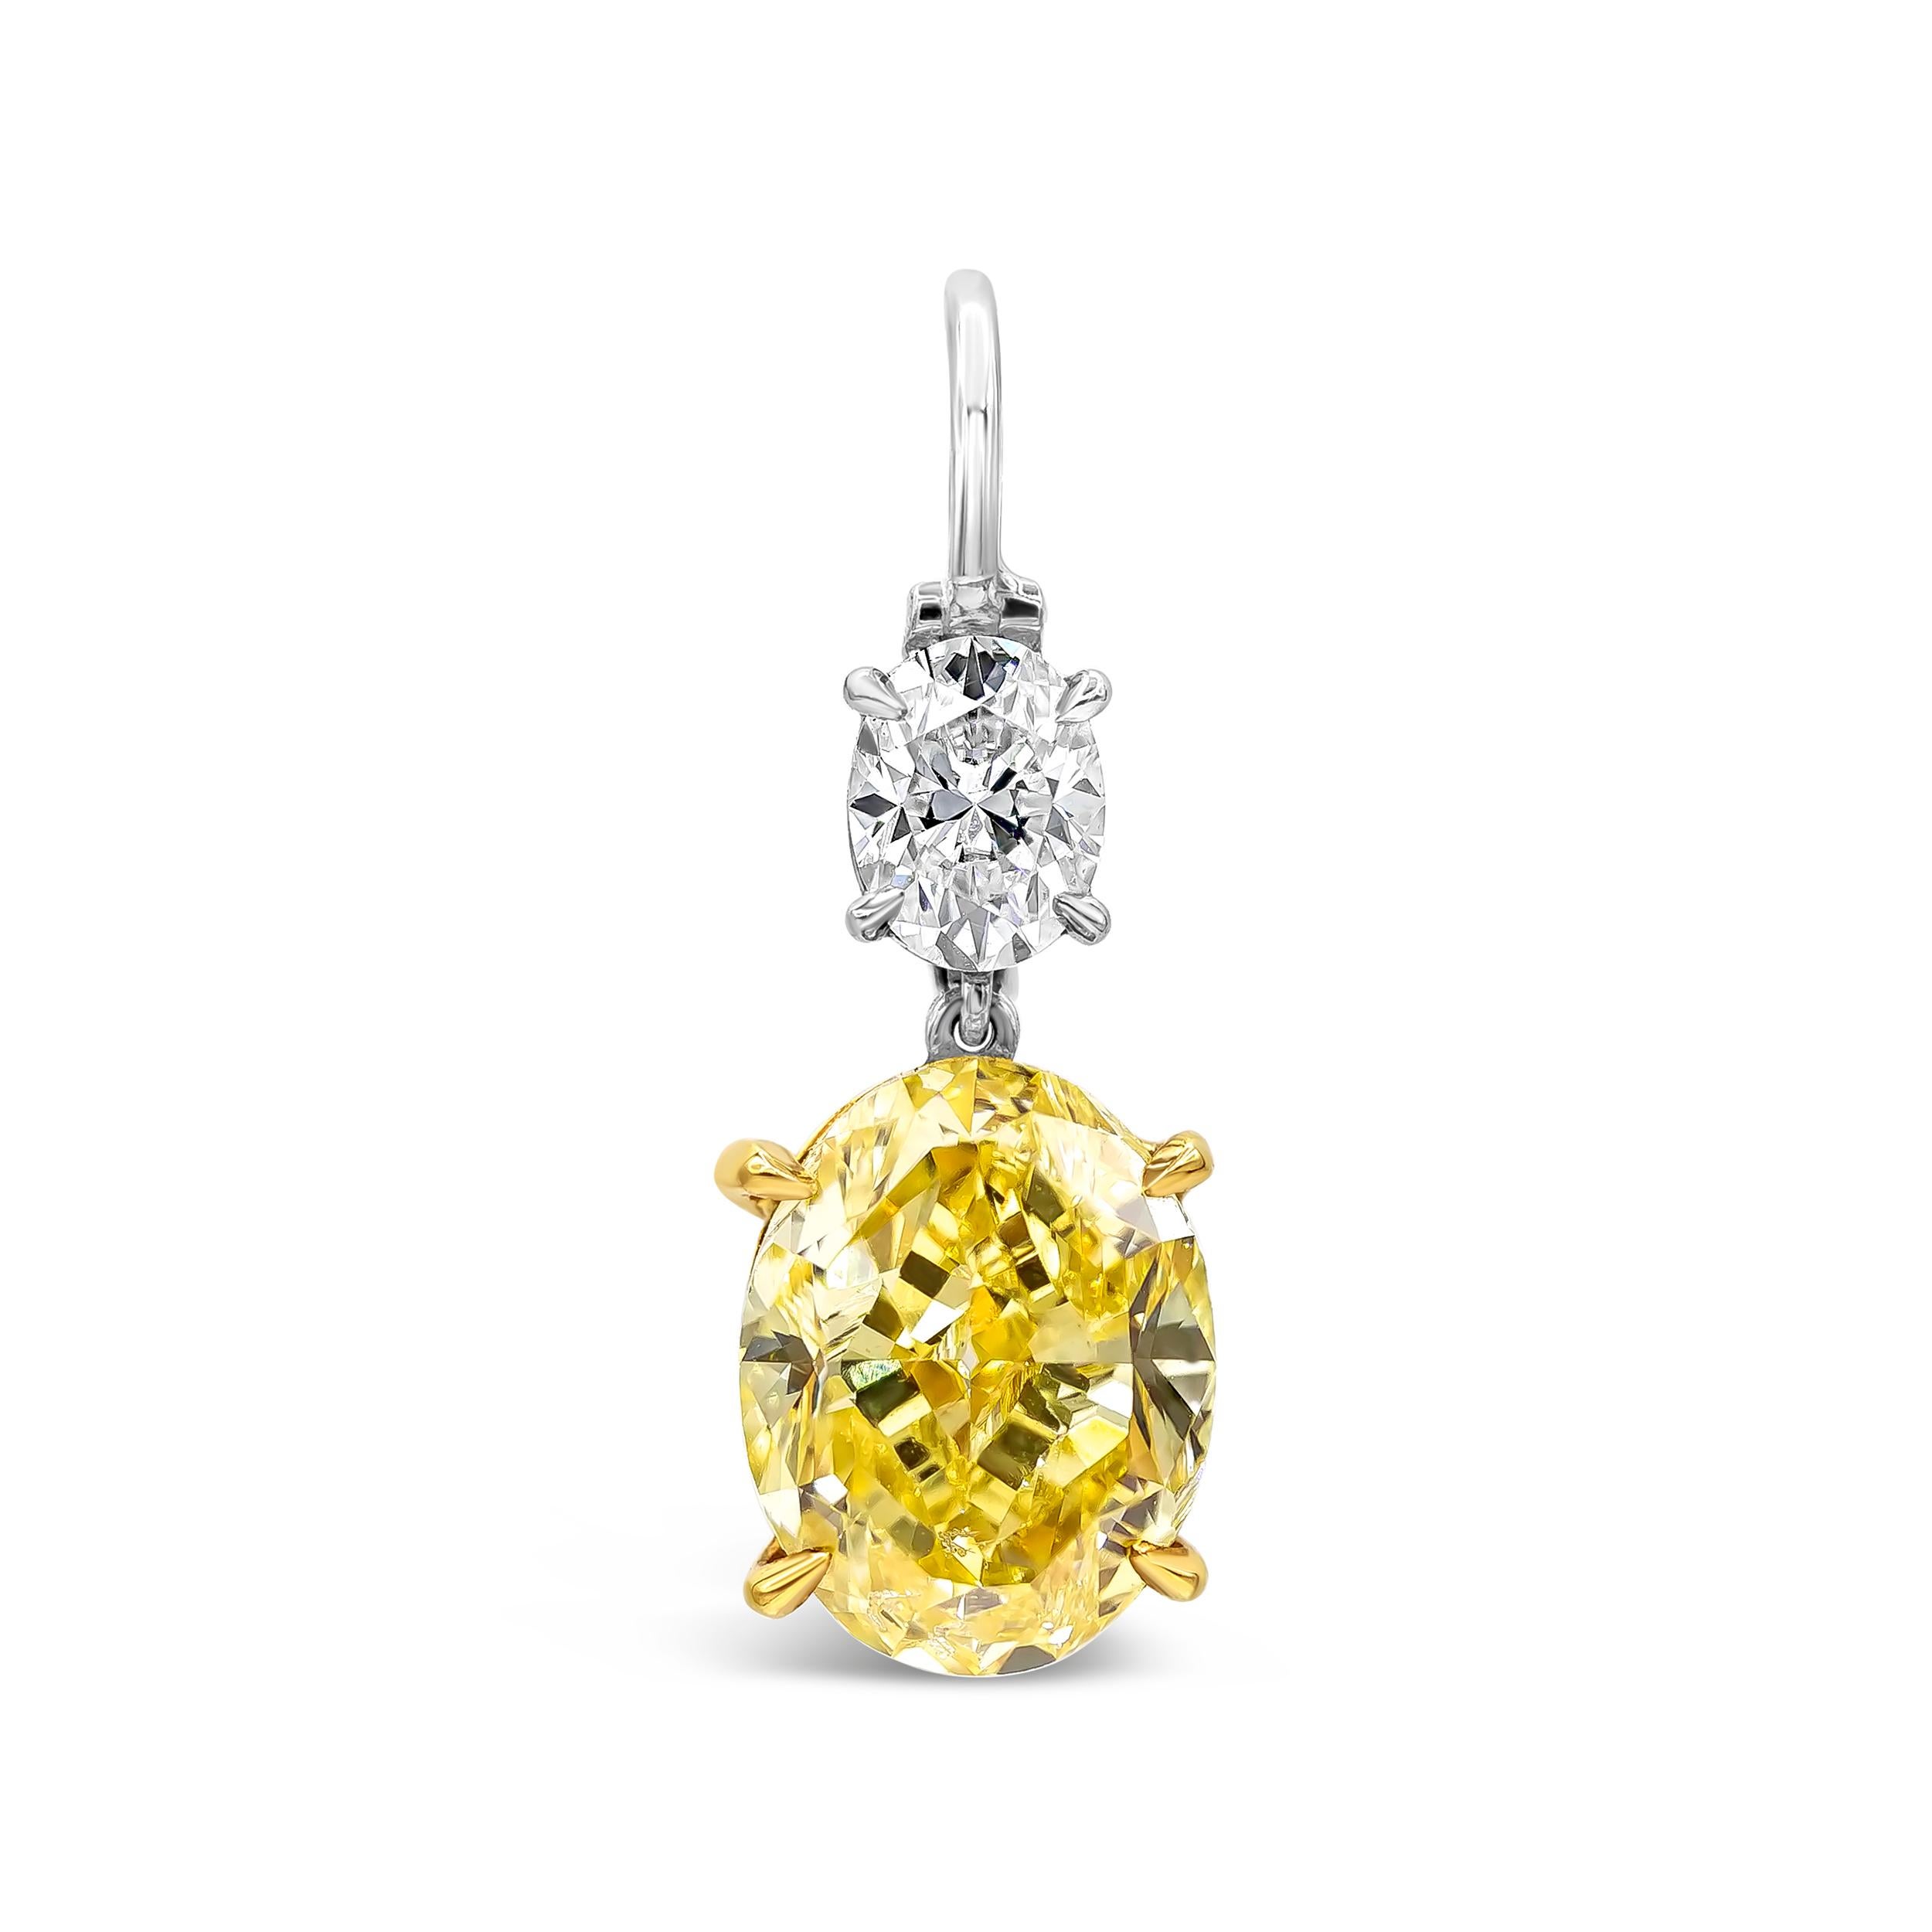 Color-rich drop earrings showcasing brilliant oval cut yellow diamonds weighing 3.21 and 3.07 carats respectively. Each yellow diamond certified by GIA as Fancy Intense Yellow color, SI1-SI2 clarity. Accenting the yellow diamond is a smaller oval